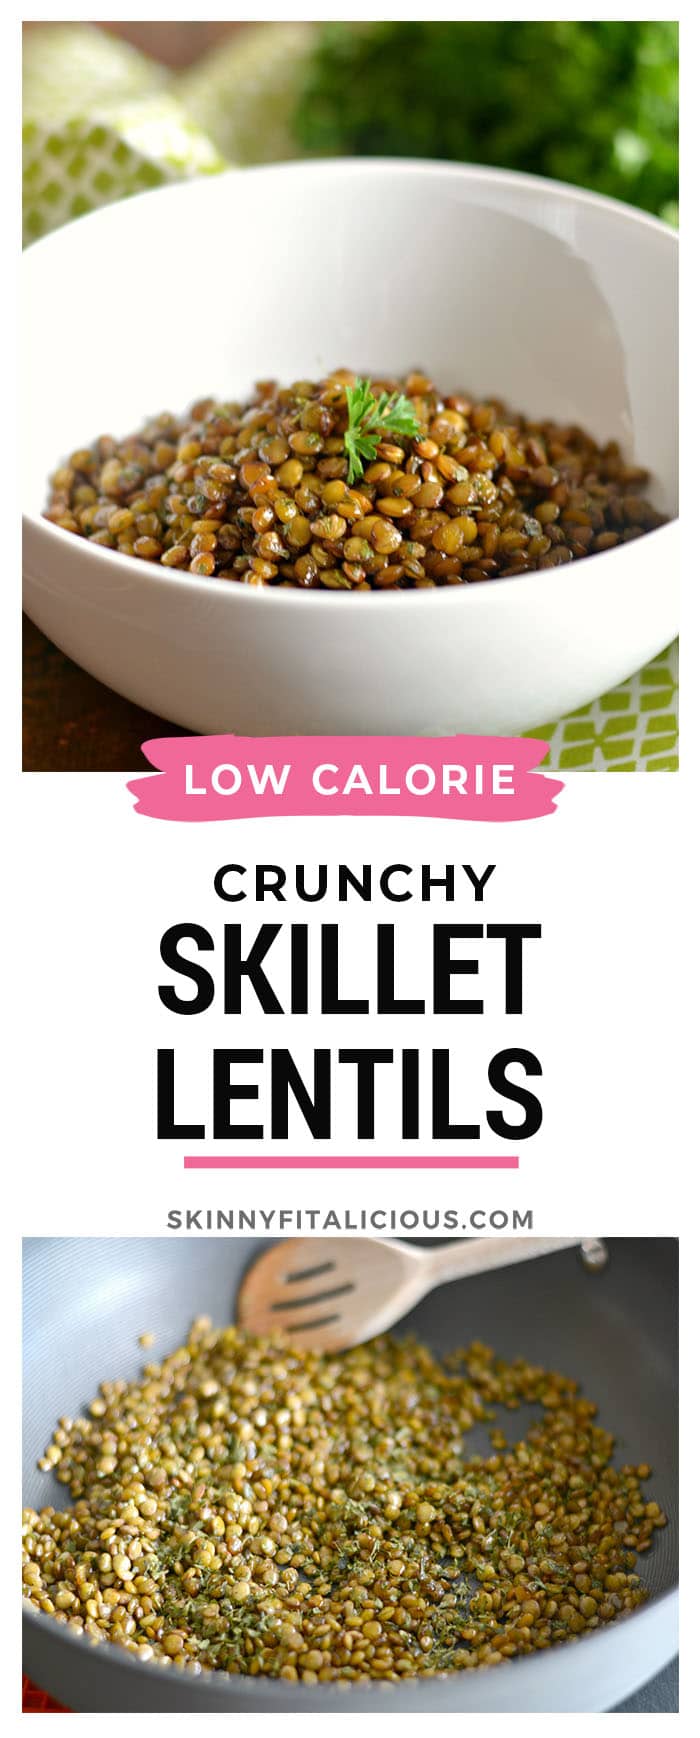 Toasted Skillet Popped Lentils seasoned with parsley and cayenne pepper. These nutty lentils make a delicious, low calorie under 20 minute meal. If you love popcorn you will love these! Gluten Free + Vegan + Low Calorie